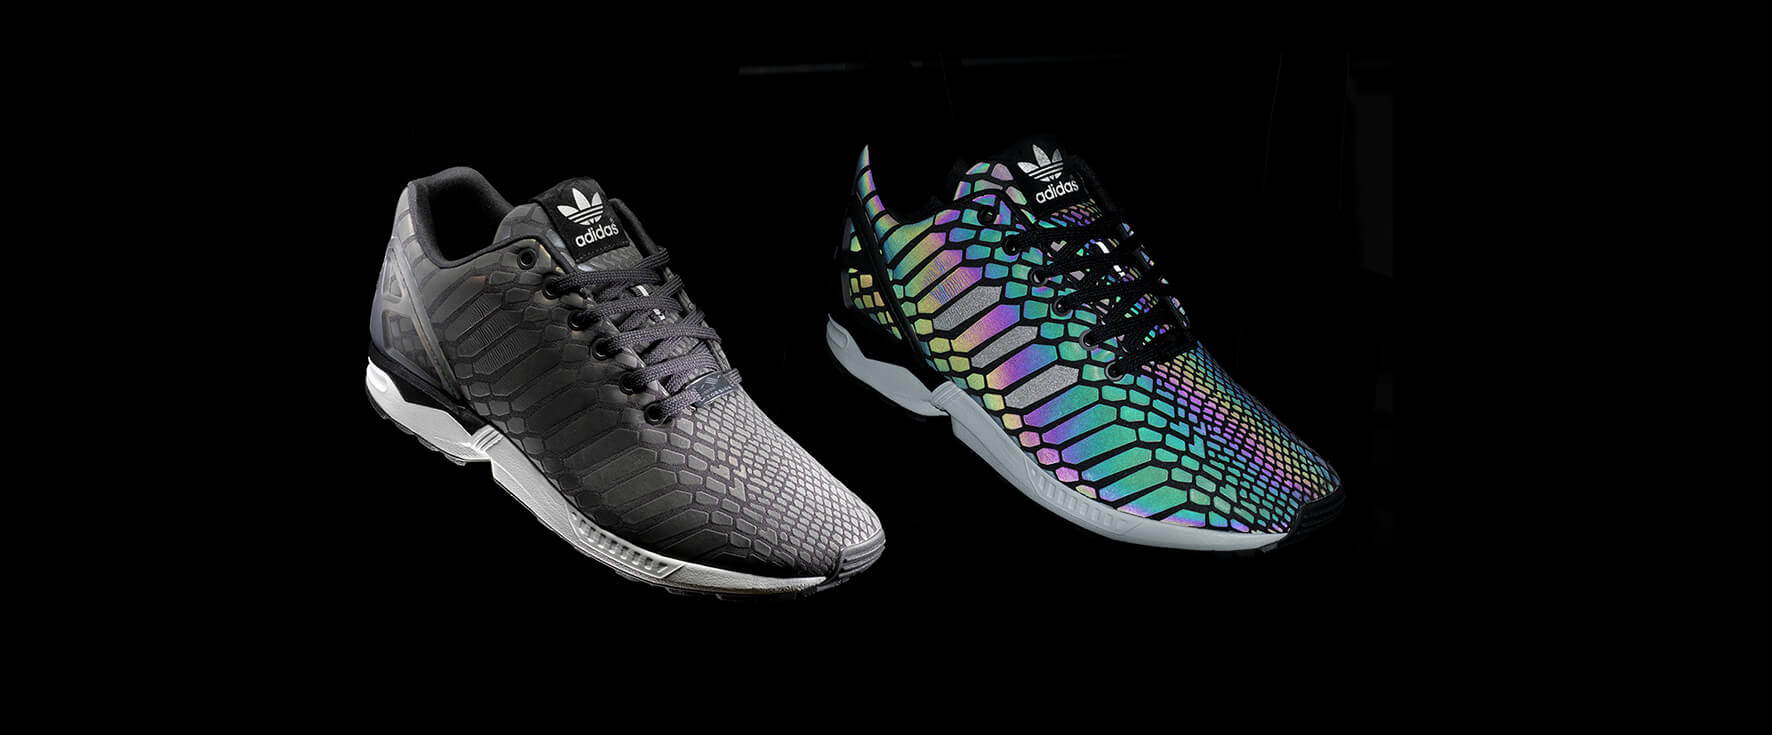 adidas color changing shoes